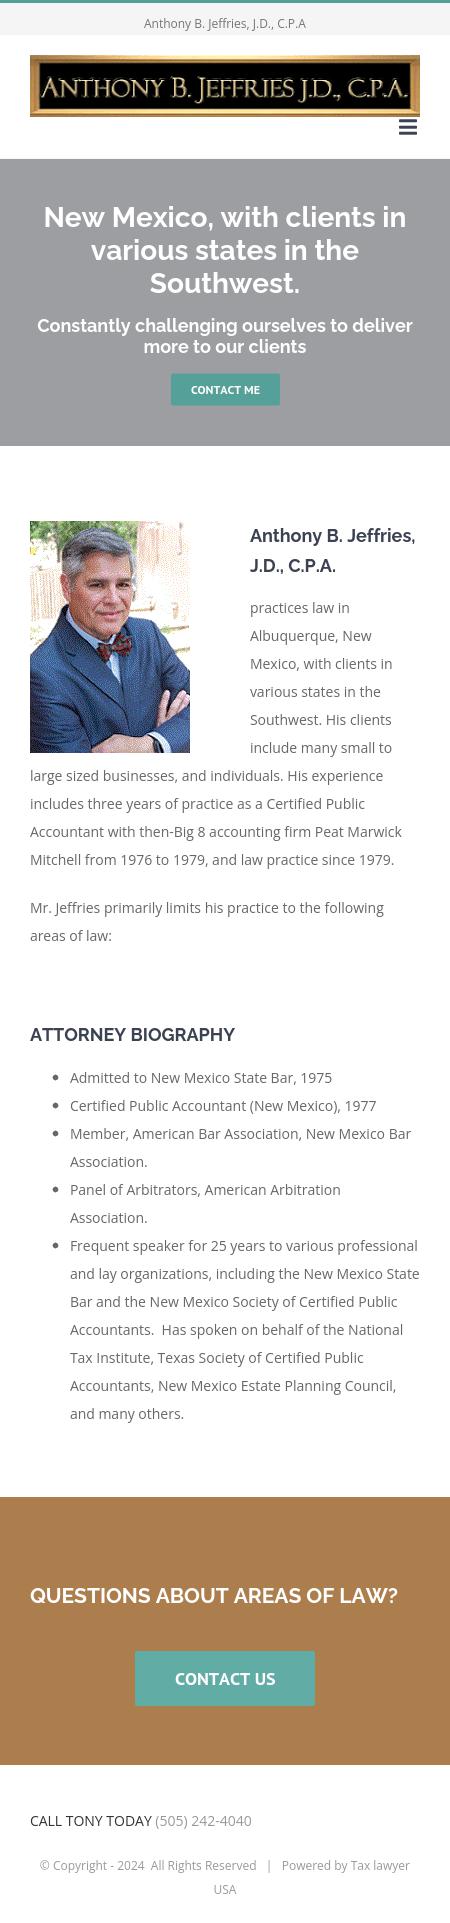 Jeffries Anthony B JD CPA - Los Ranchos NM Lawyers